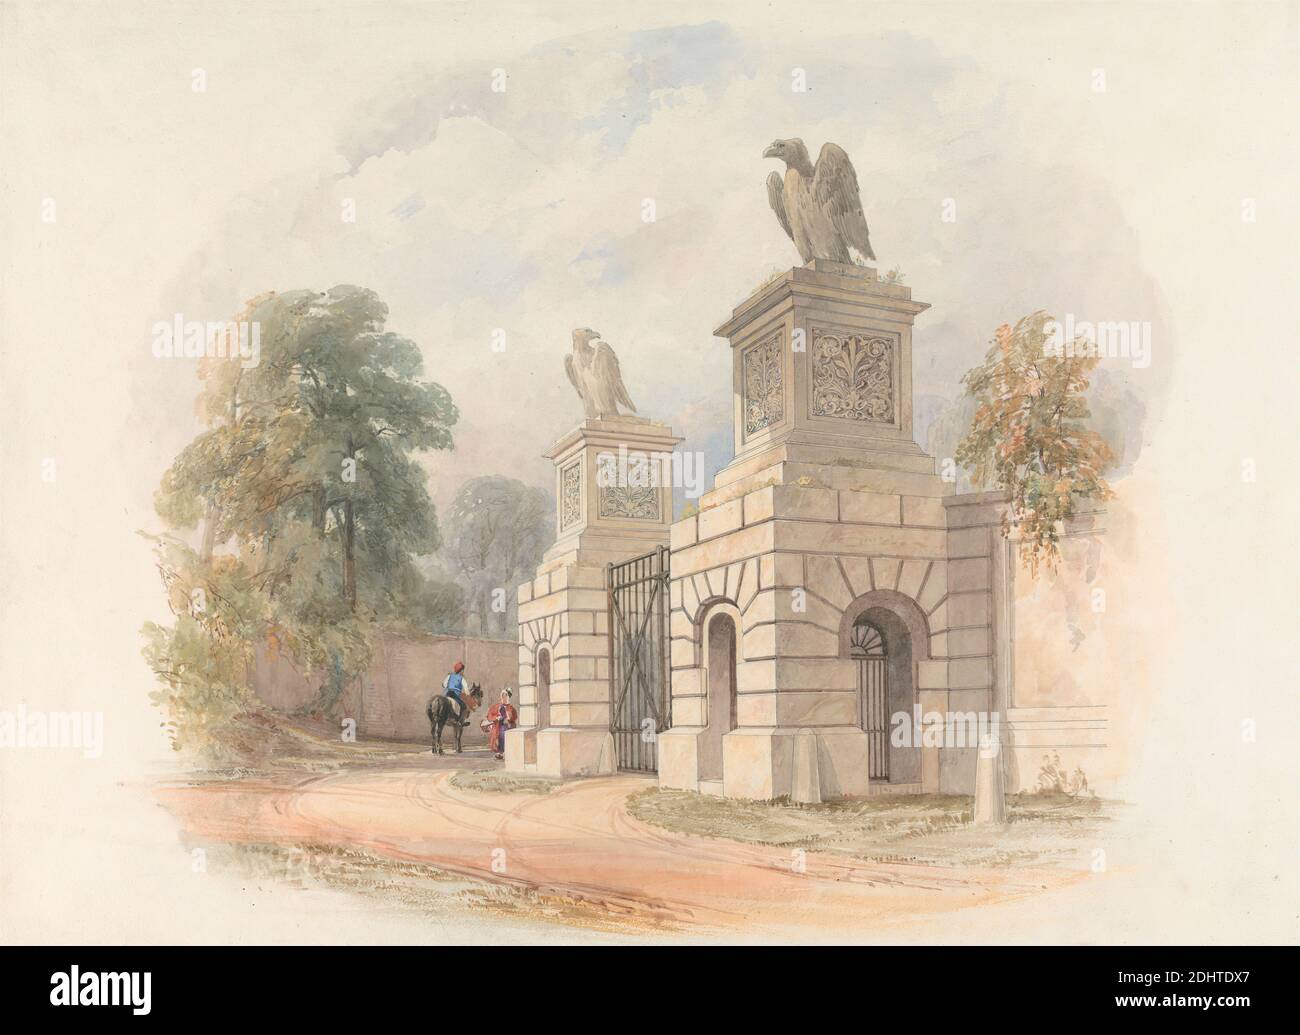 Design for a Park Gateway, Edward Blore, 1789–1879, British, undated, Watercolor, gouache, graphite, etched lines, with black ink, and pen in brown ink on medium, slightly textured, cream, wove paper, mounted on moderately thick, moderately textured, cream, wove paper, Sheet: 10 15/16 × 15 1/16 inches (27.8 × 38.3 cm), architectural subject, bird, design, eagles (birds), gate, gateway, horse (animal), park (grounds), statue Stock Photo